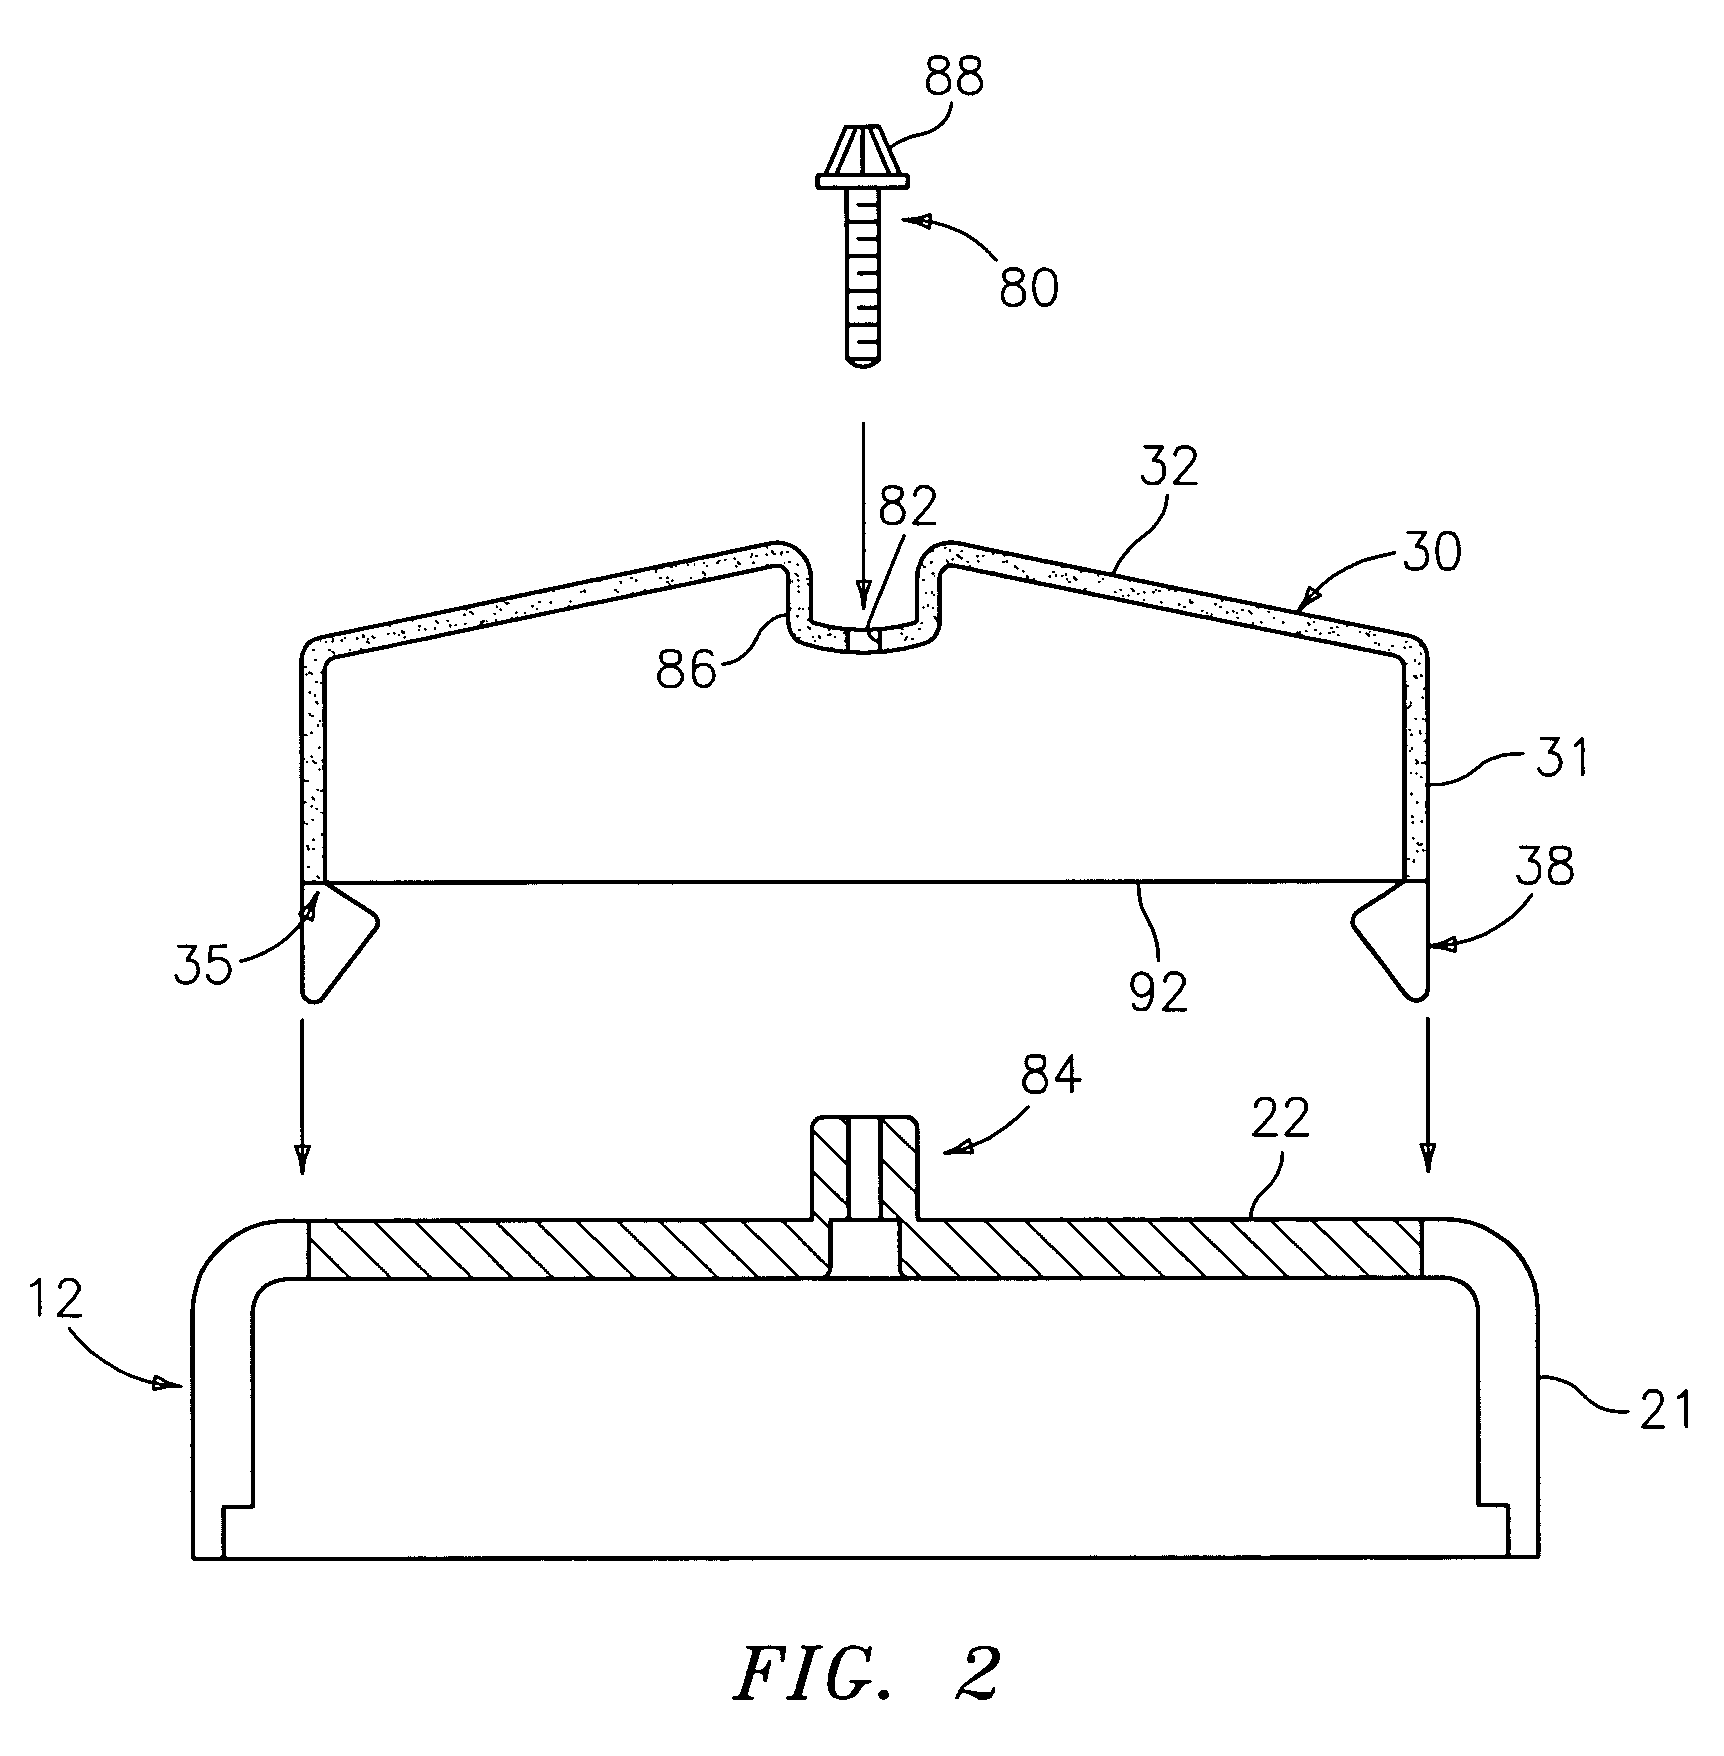 Method and apparatus for attachment of a cover for a dynamoelectric machine